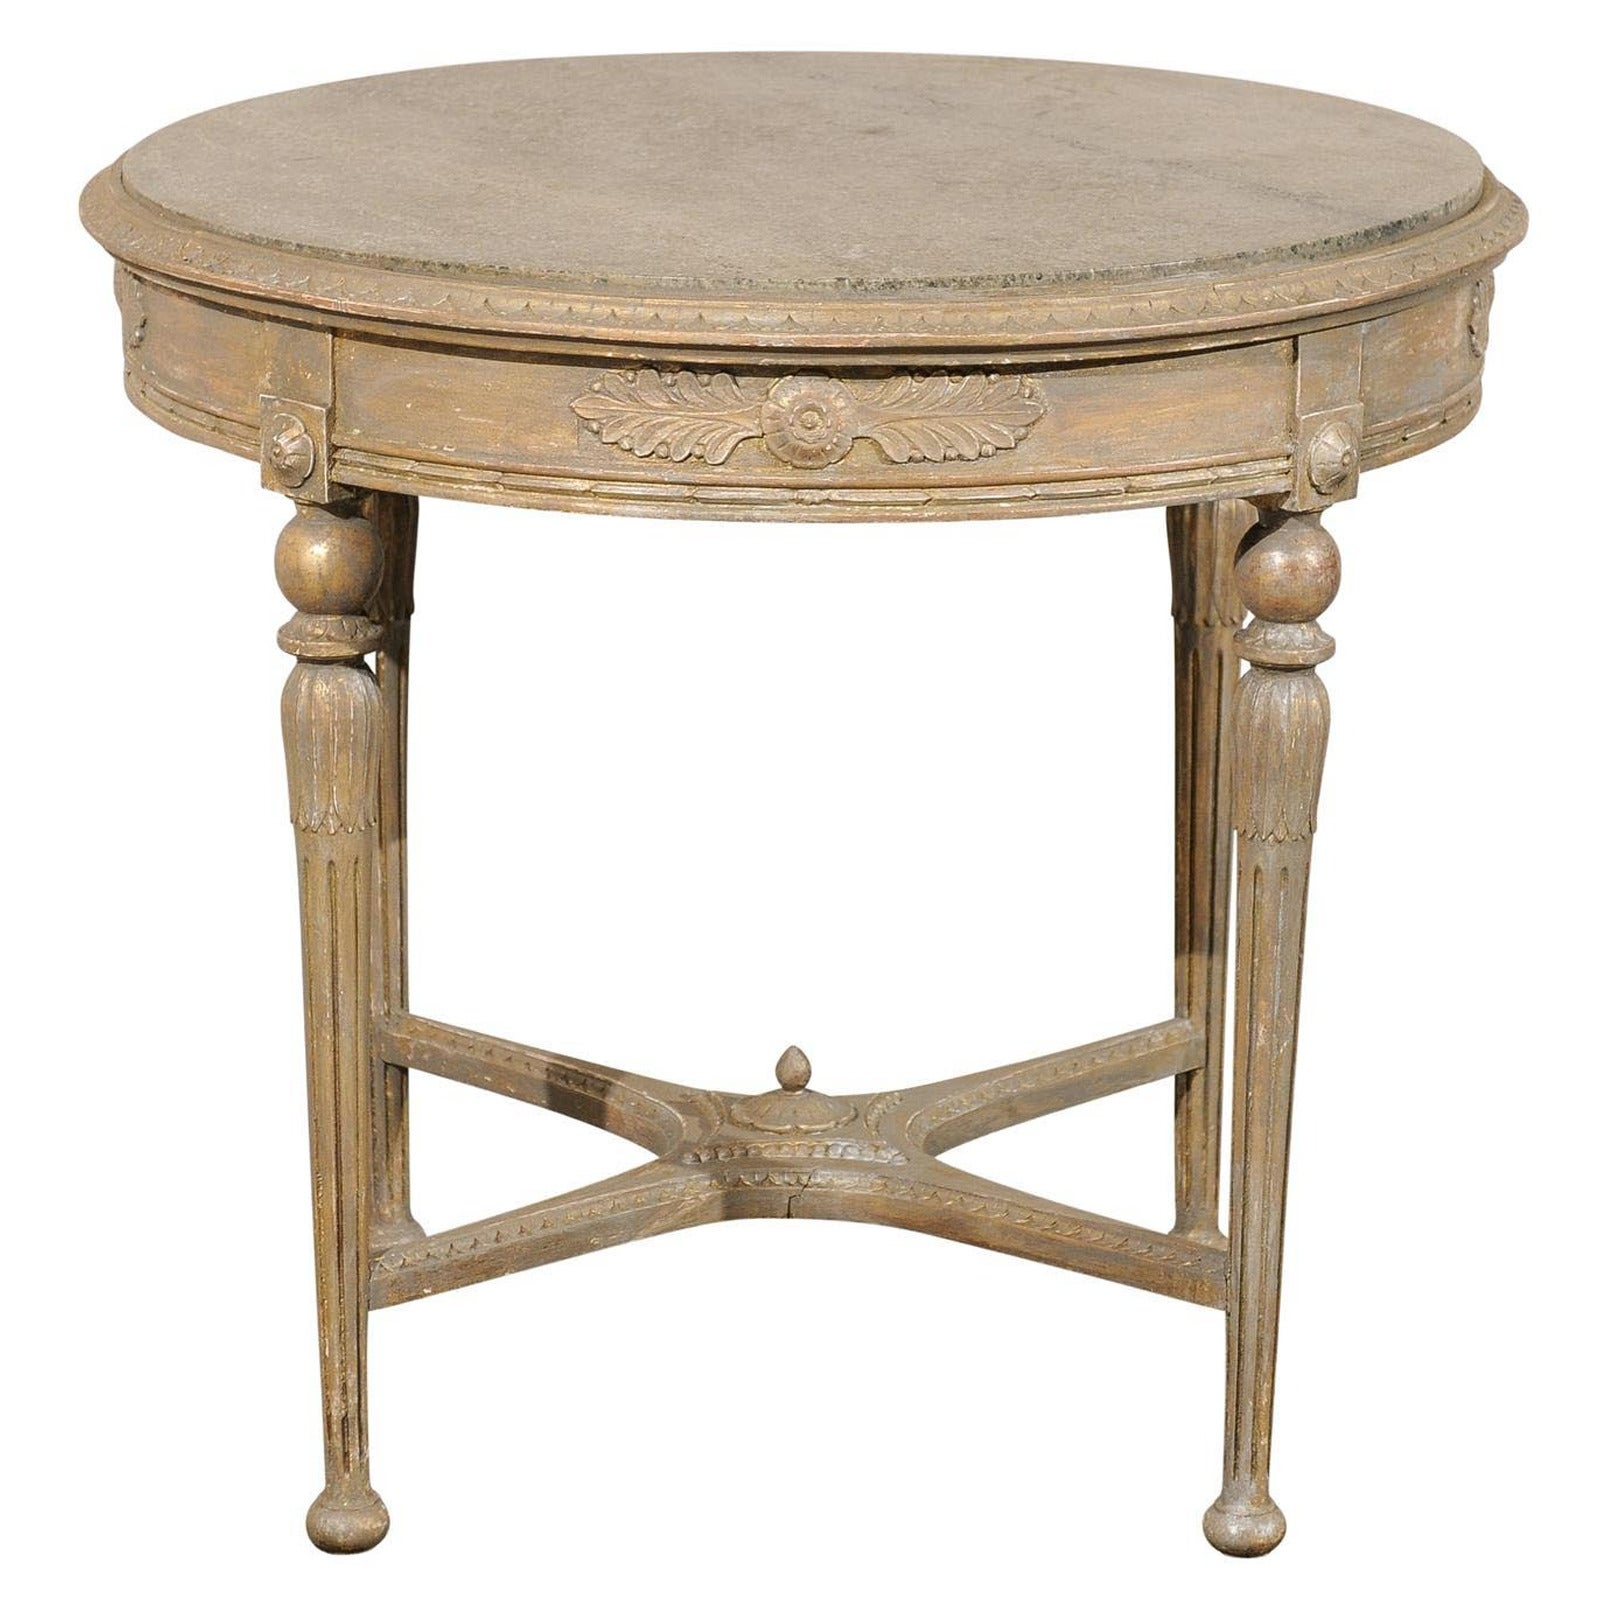 Swedish Mid-19th Century Center Table with Marble Top